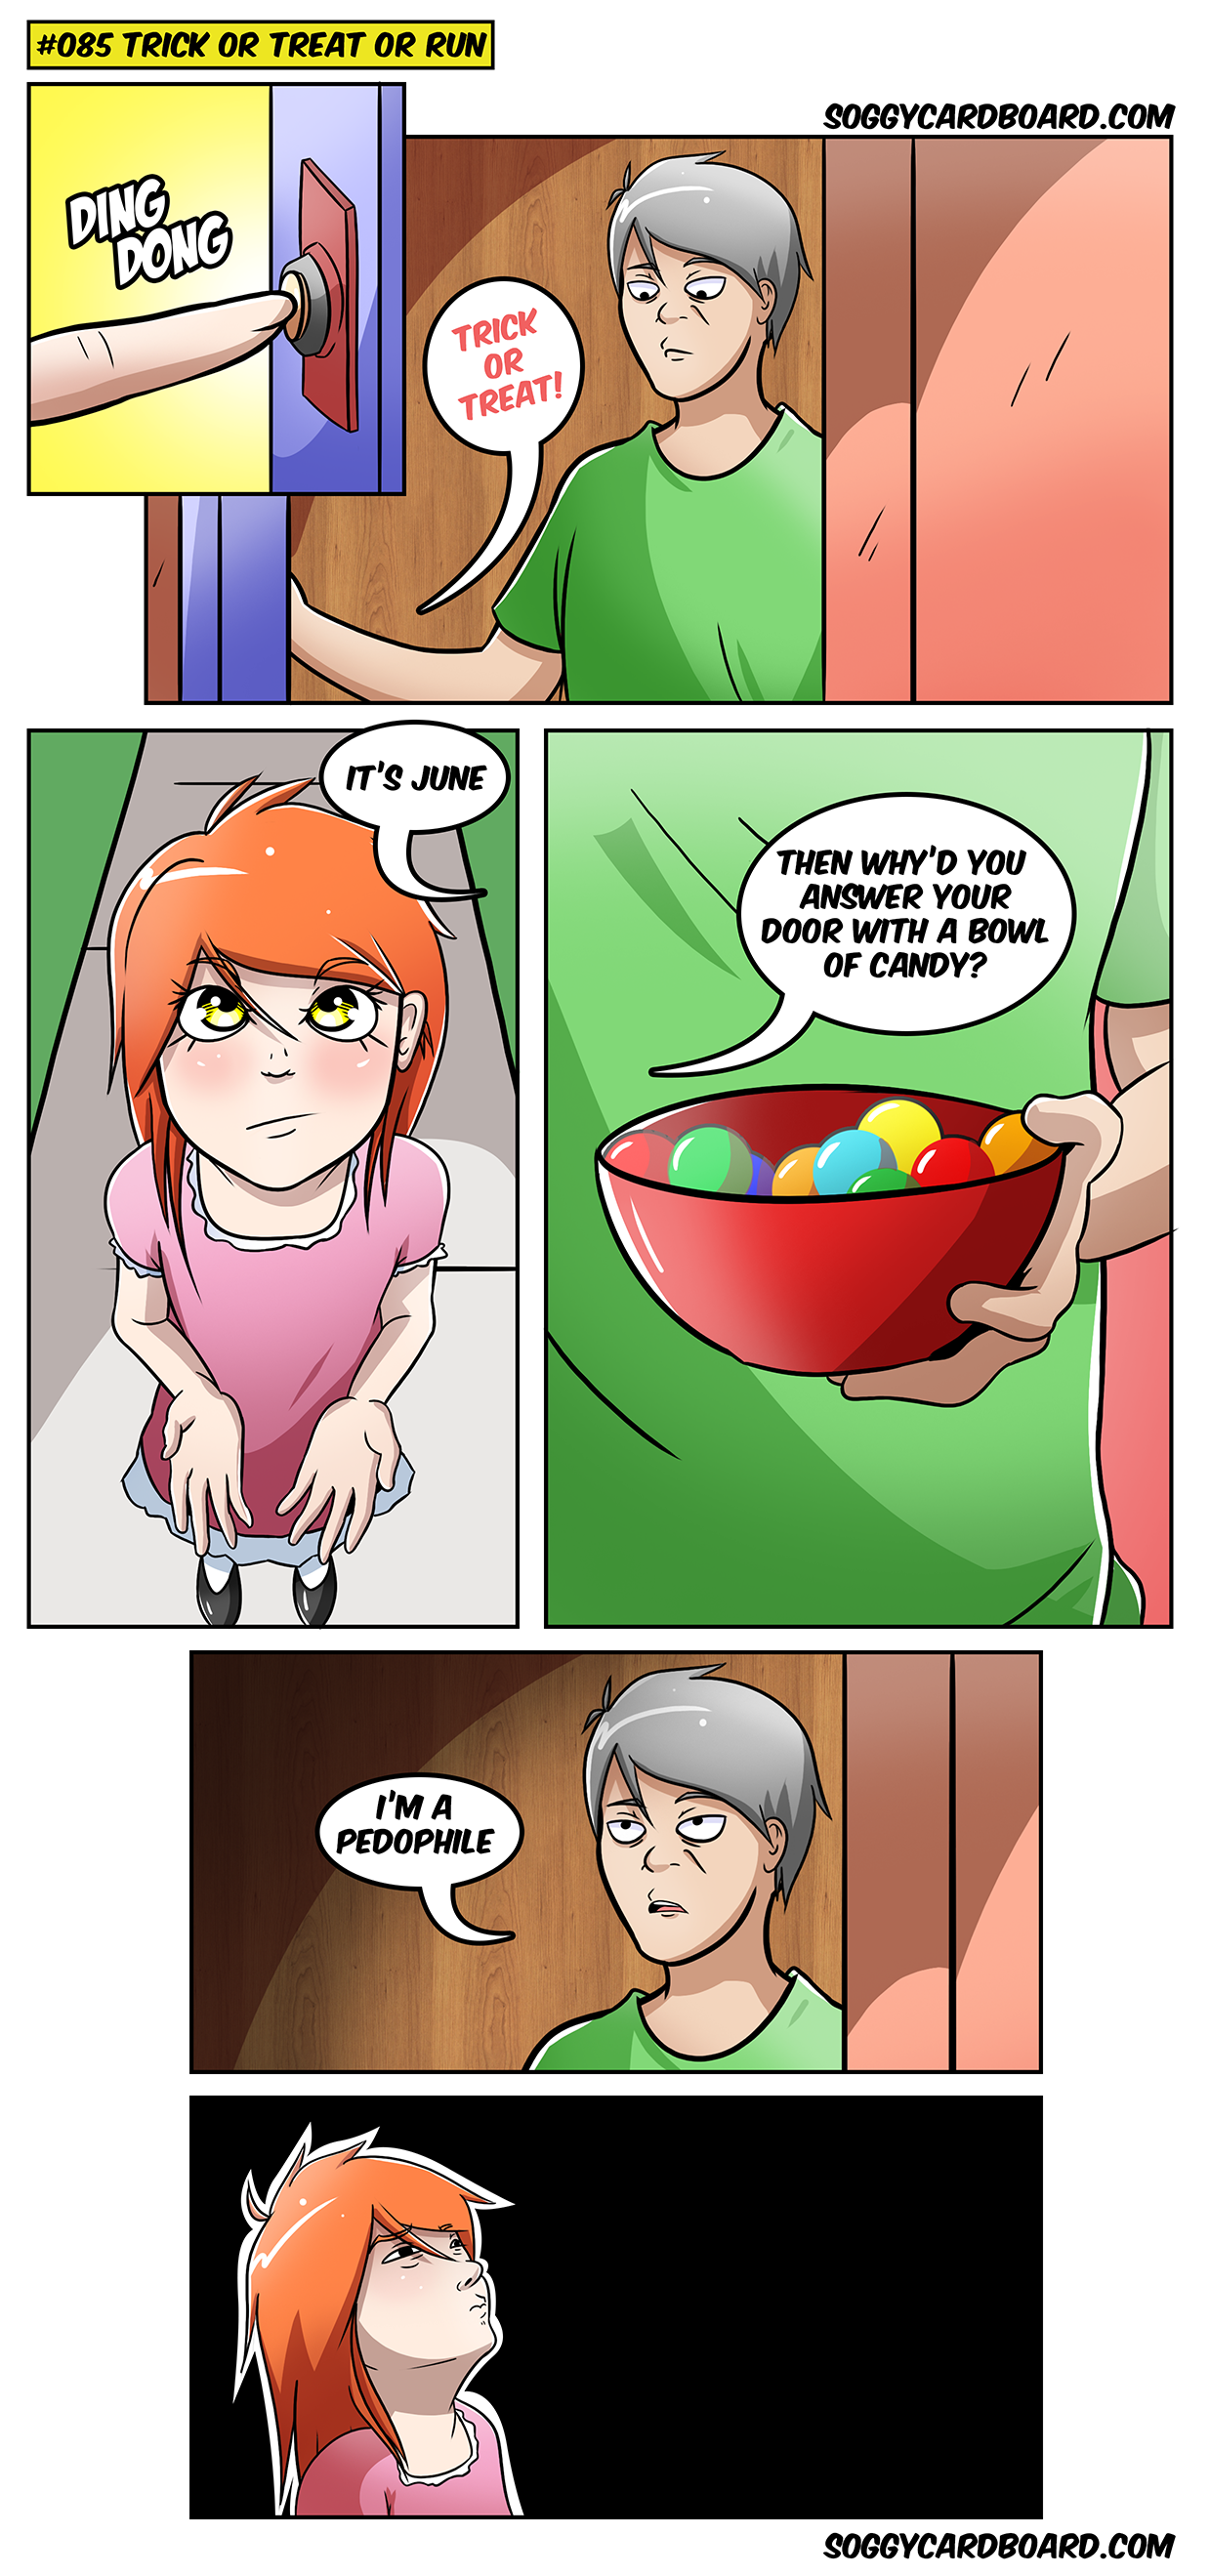 Who the FUCK let a ginger into my comic?